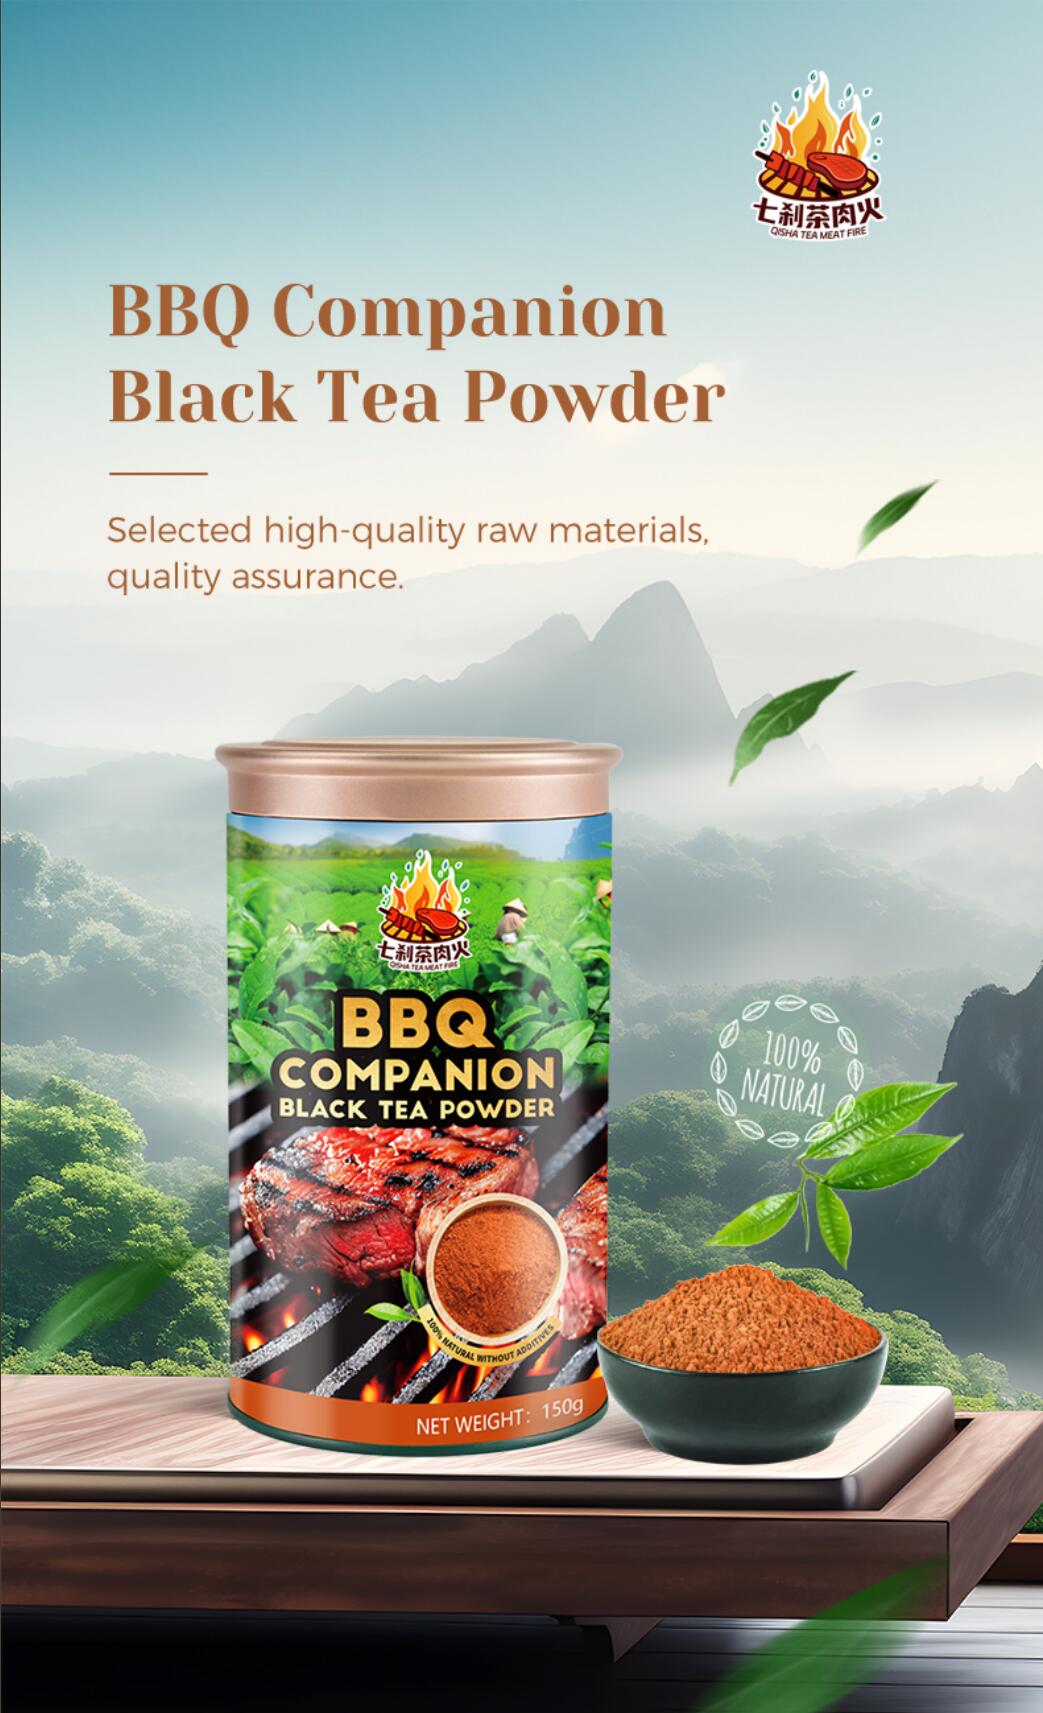 The secret weapon for delicious barbecue: the mysterious Chinese tea powder seasoning插图